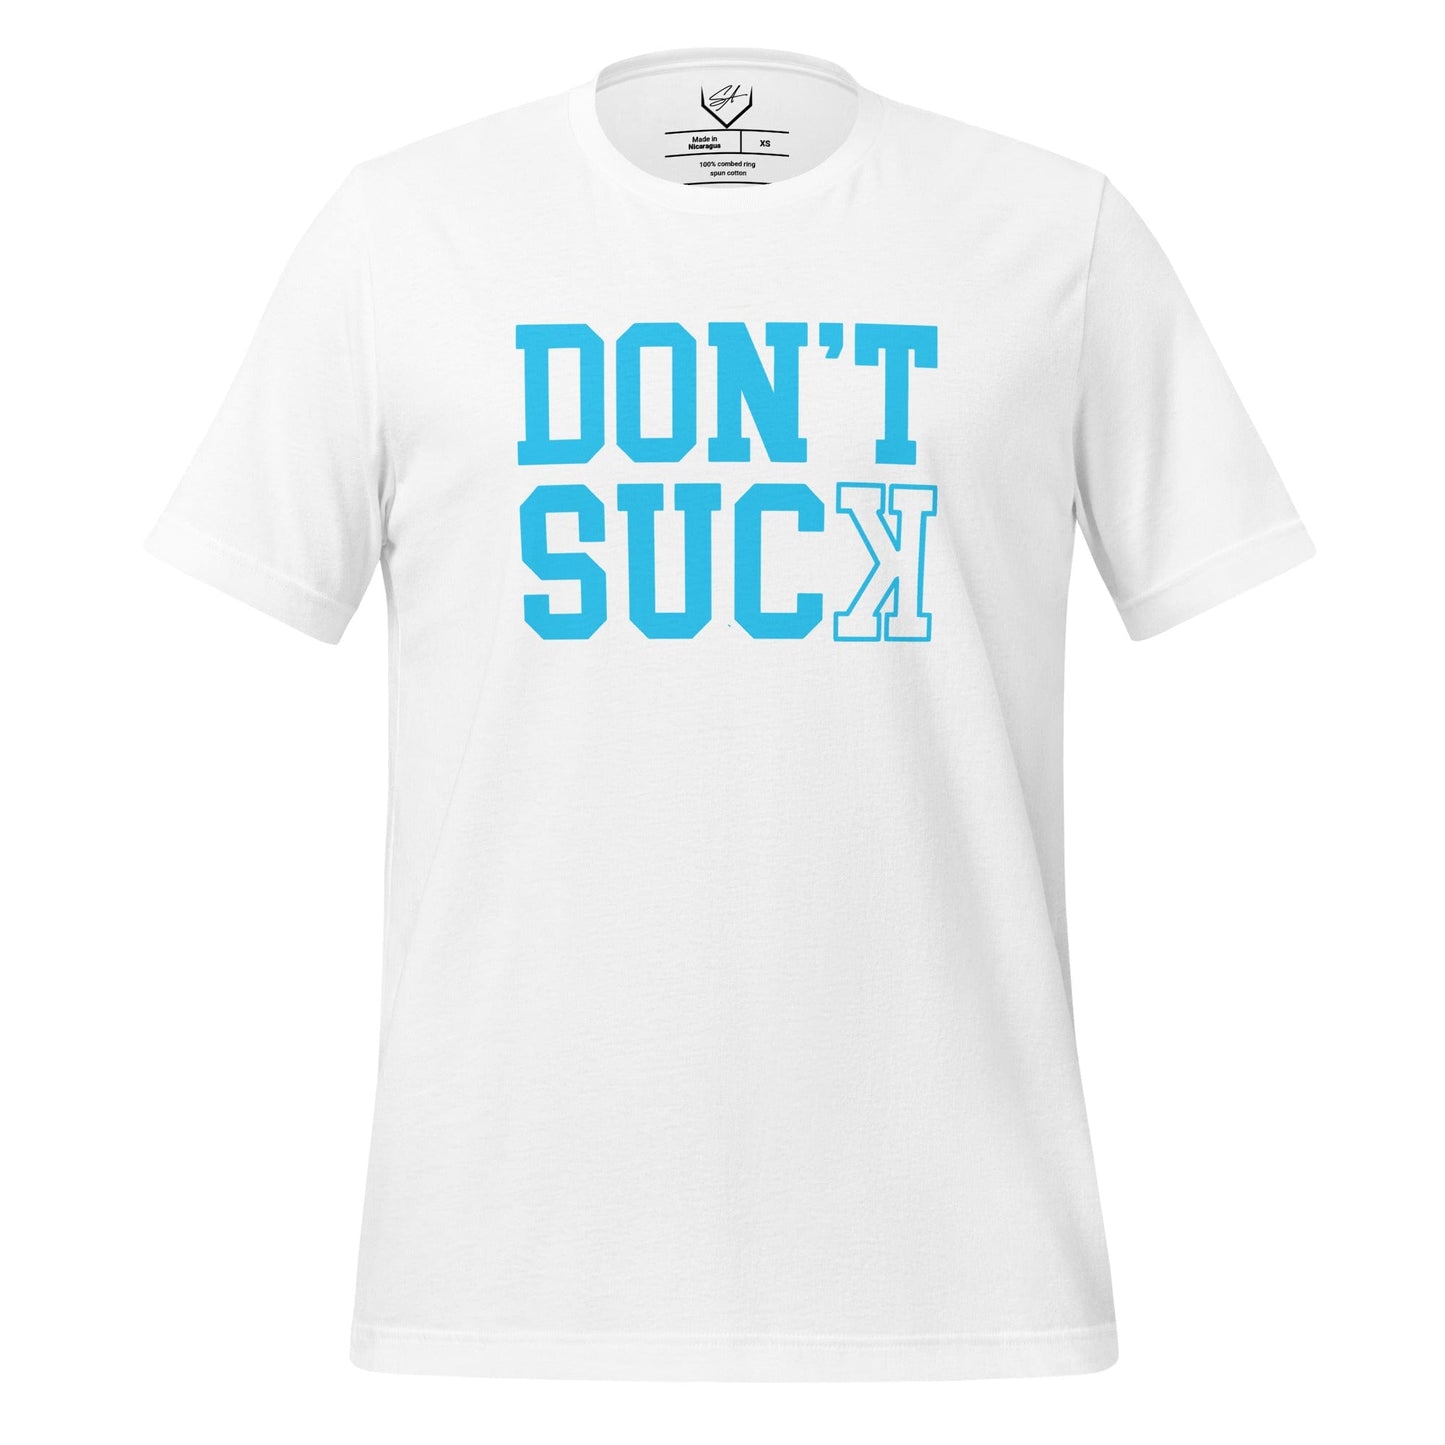 Don't Suck Teal - Adult Tee